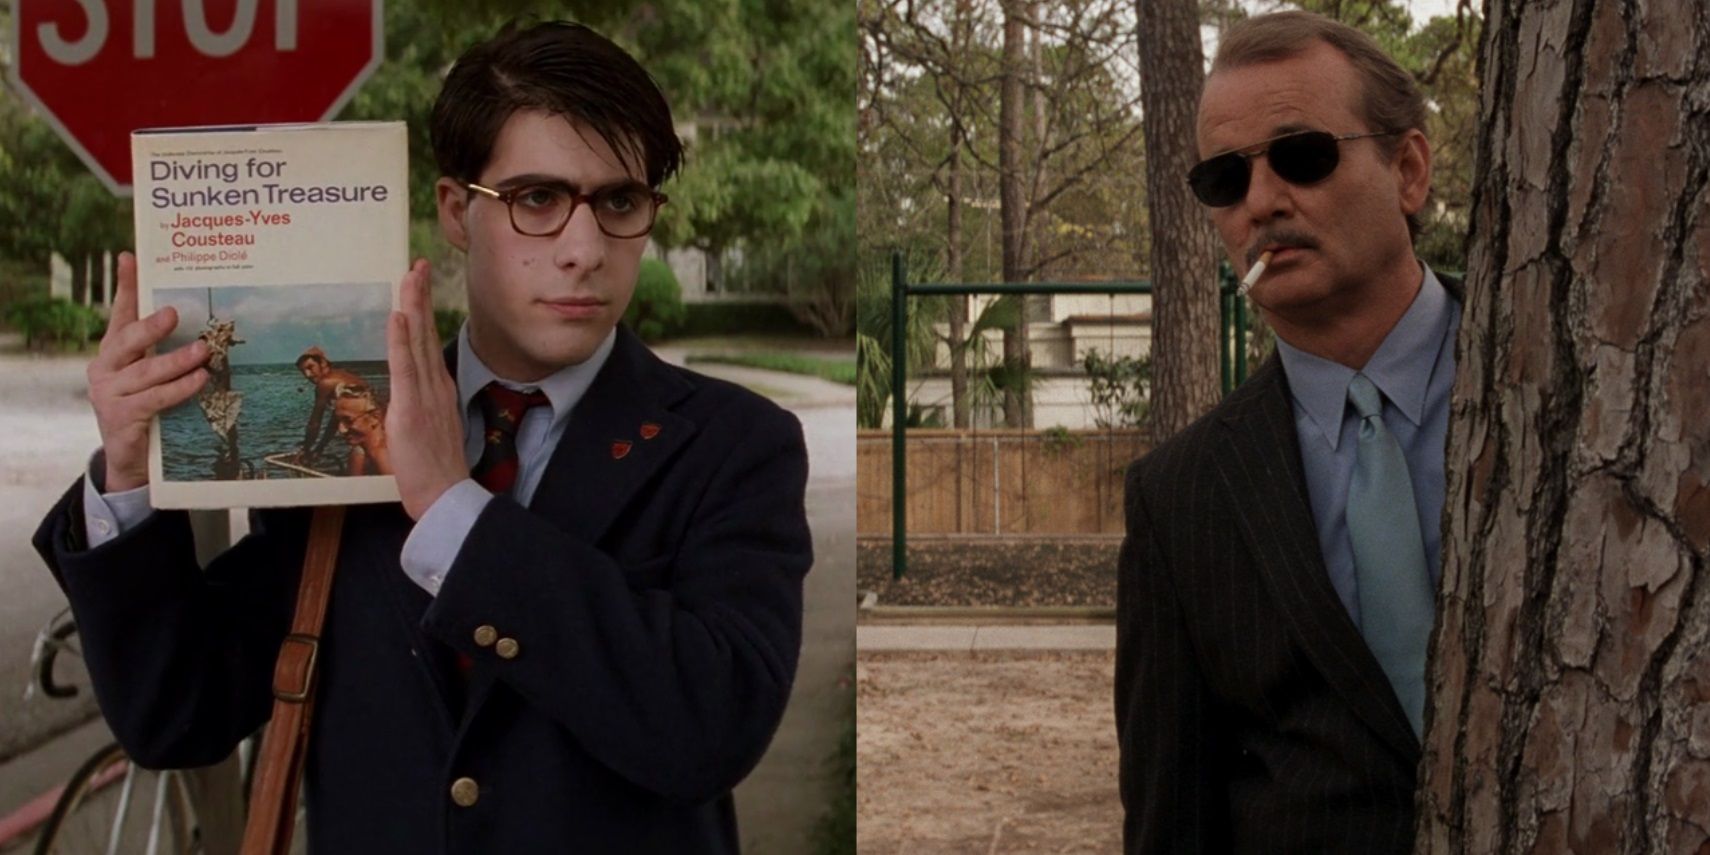 10 Wes Anderson Trademarks In Rushmore